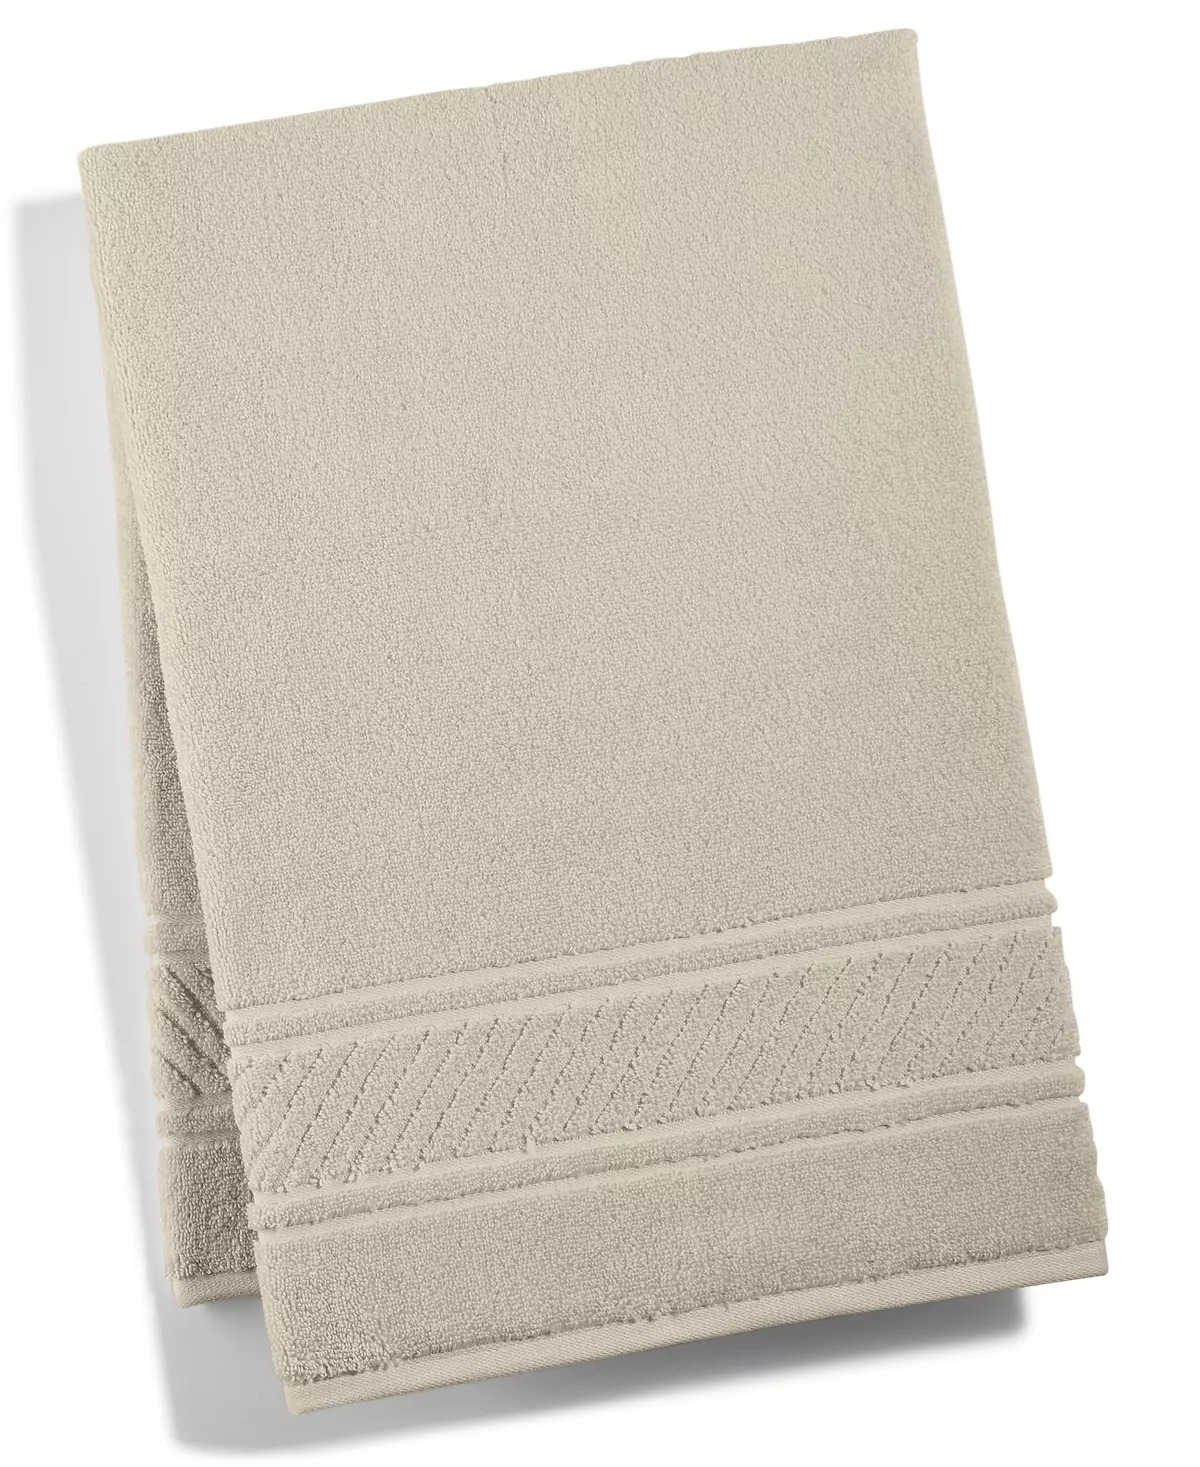 Martha Stewart Spa 100% Cotton Bath Towels (Various Colors): Bath Towel $8, Hand Towel $6.40 & More + Free Store Pickup at Macy's or F/S on Orders $25+